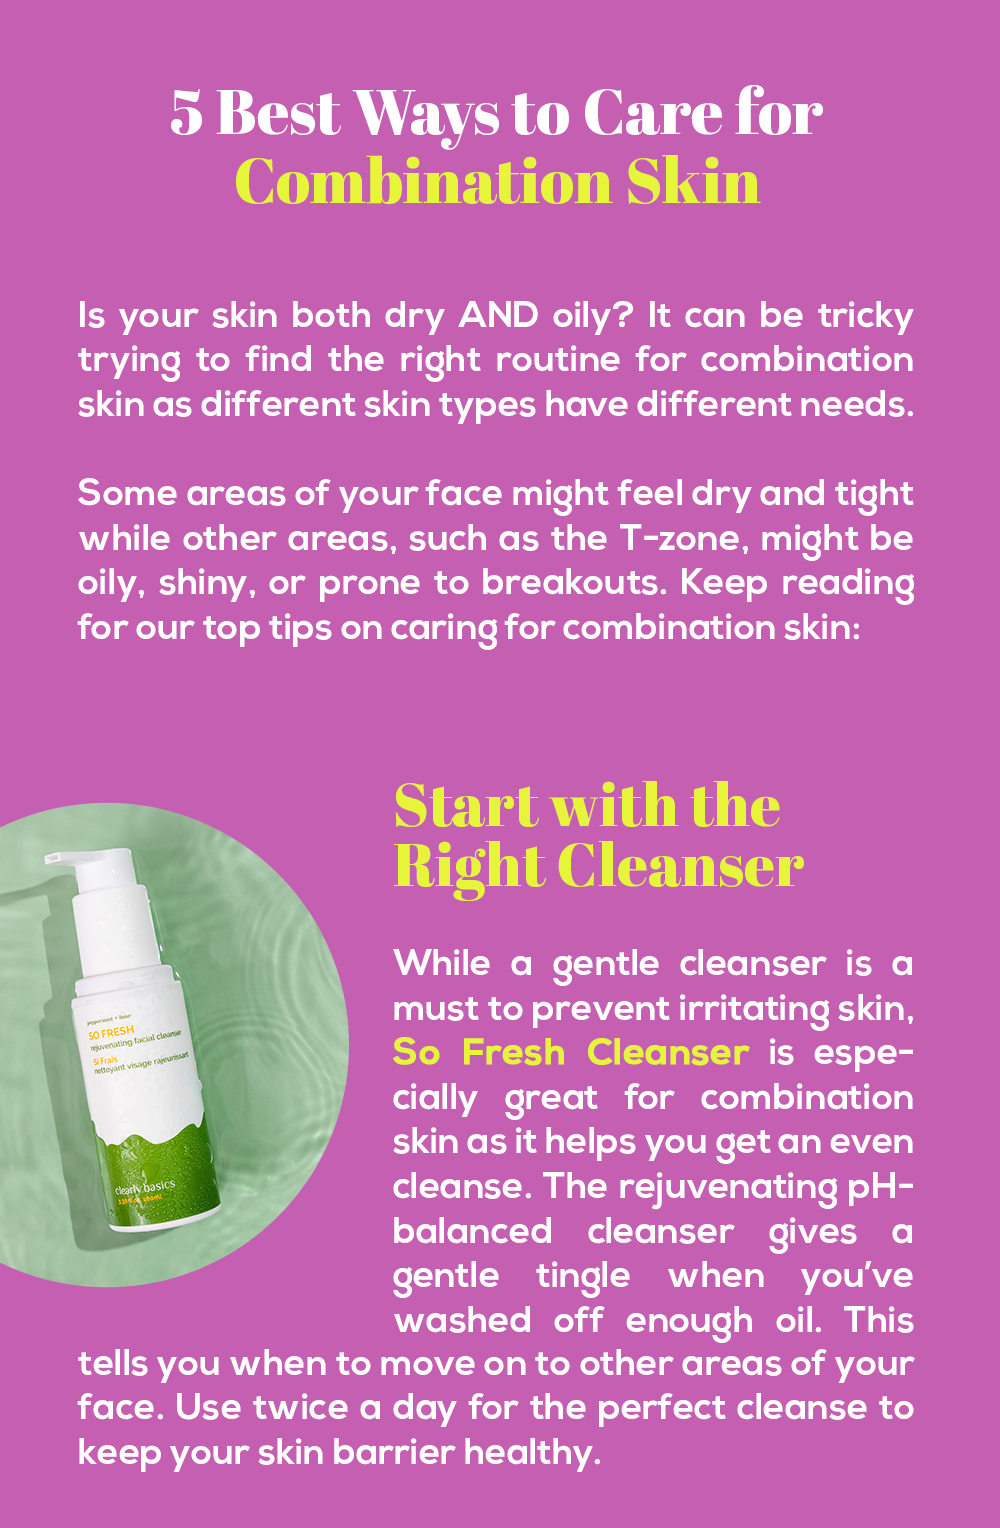 How to Care for Combination Skin - Clearly Basics